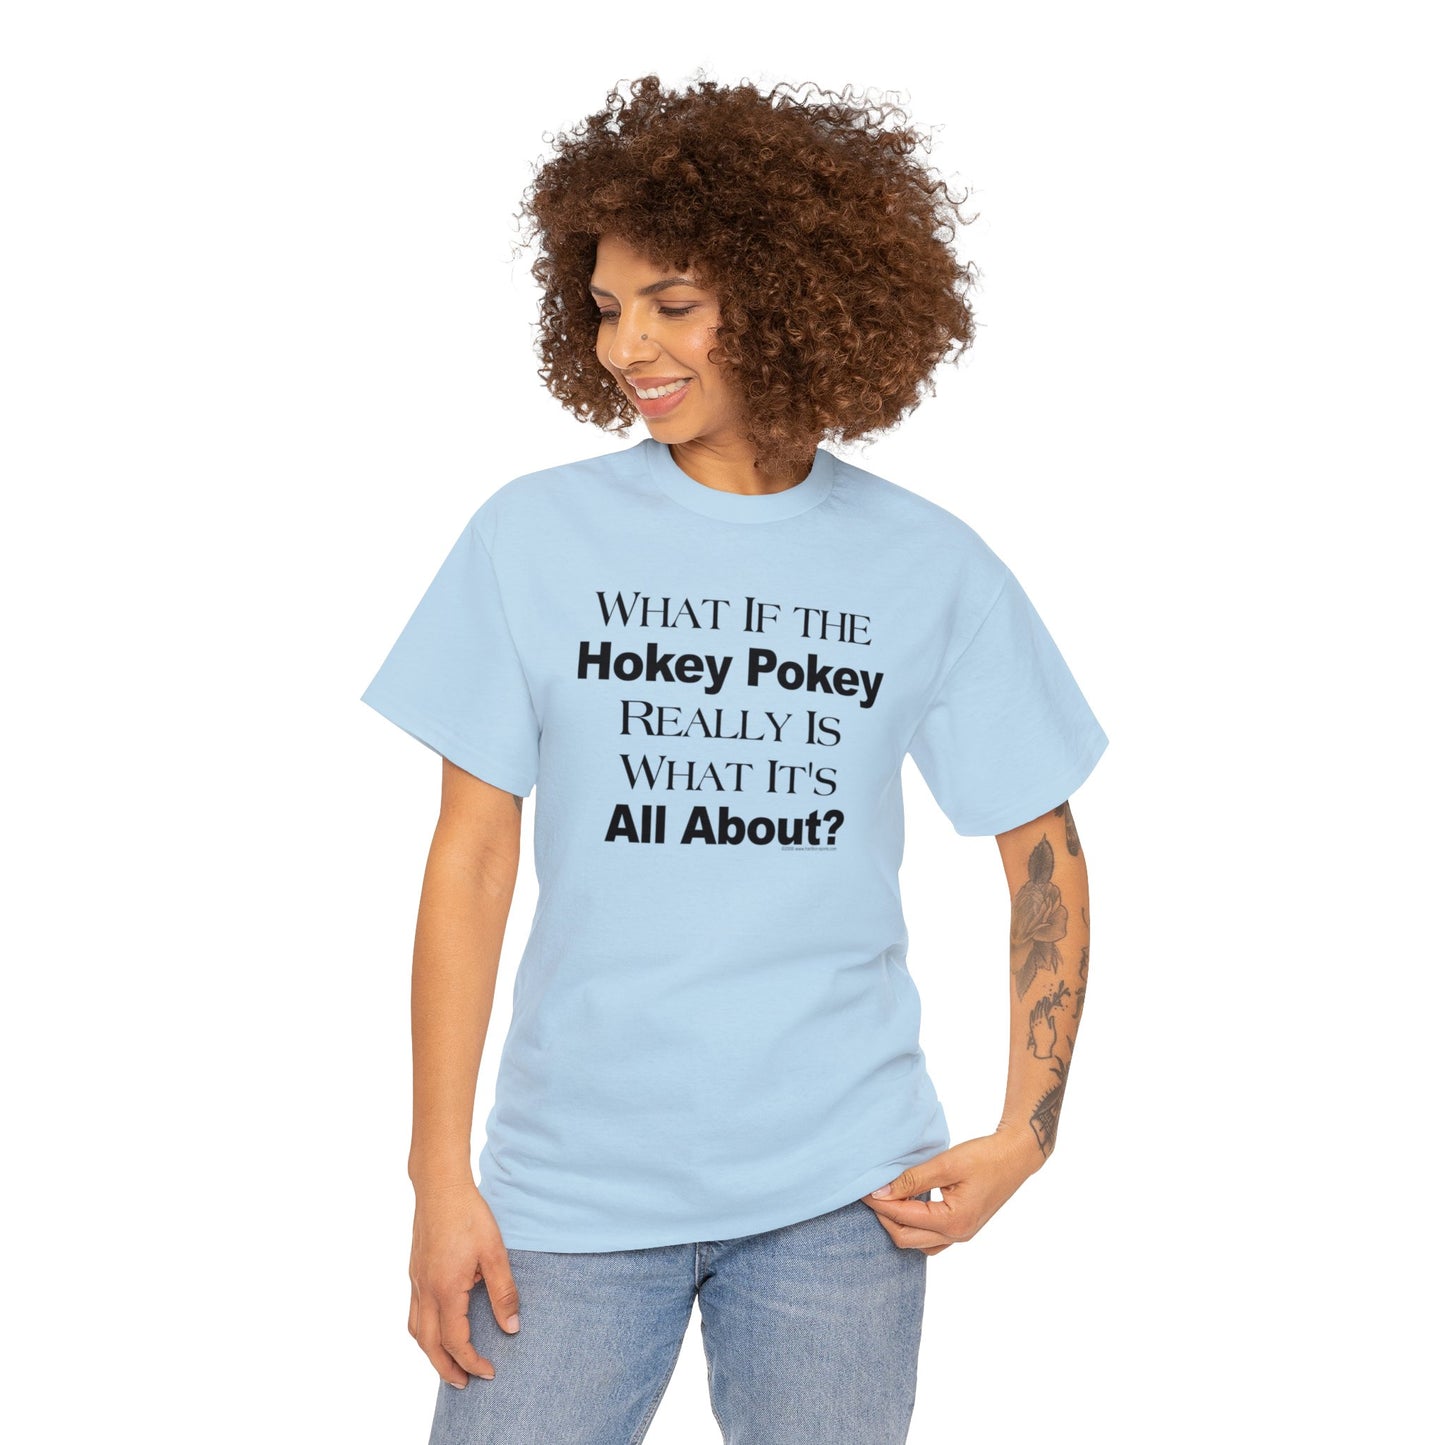 What if the Hokey Pokey Really Is What It's All About T-Shirt, Thoughtful T-Shirt, Funny Adult T-Shirt, Humorous Tee, Funny T-Shirt Gift